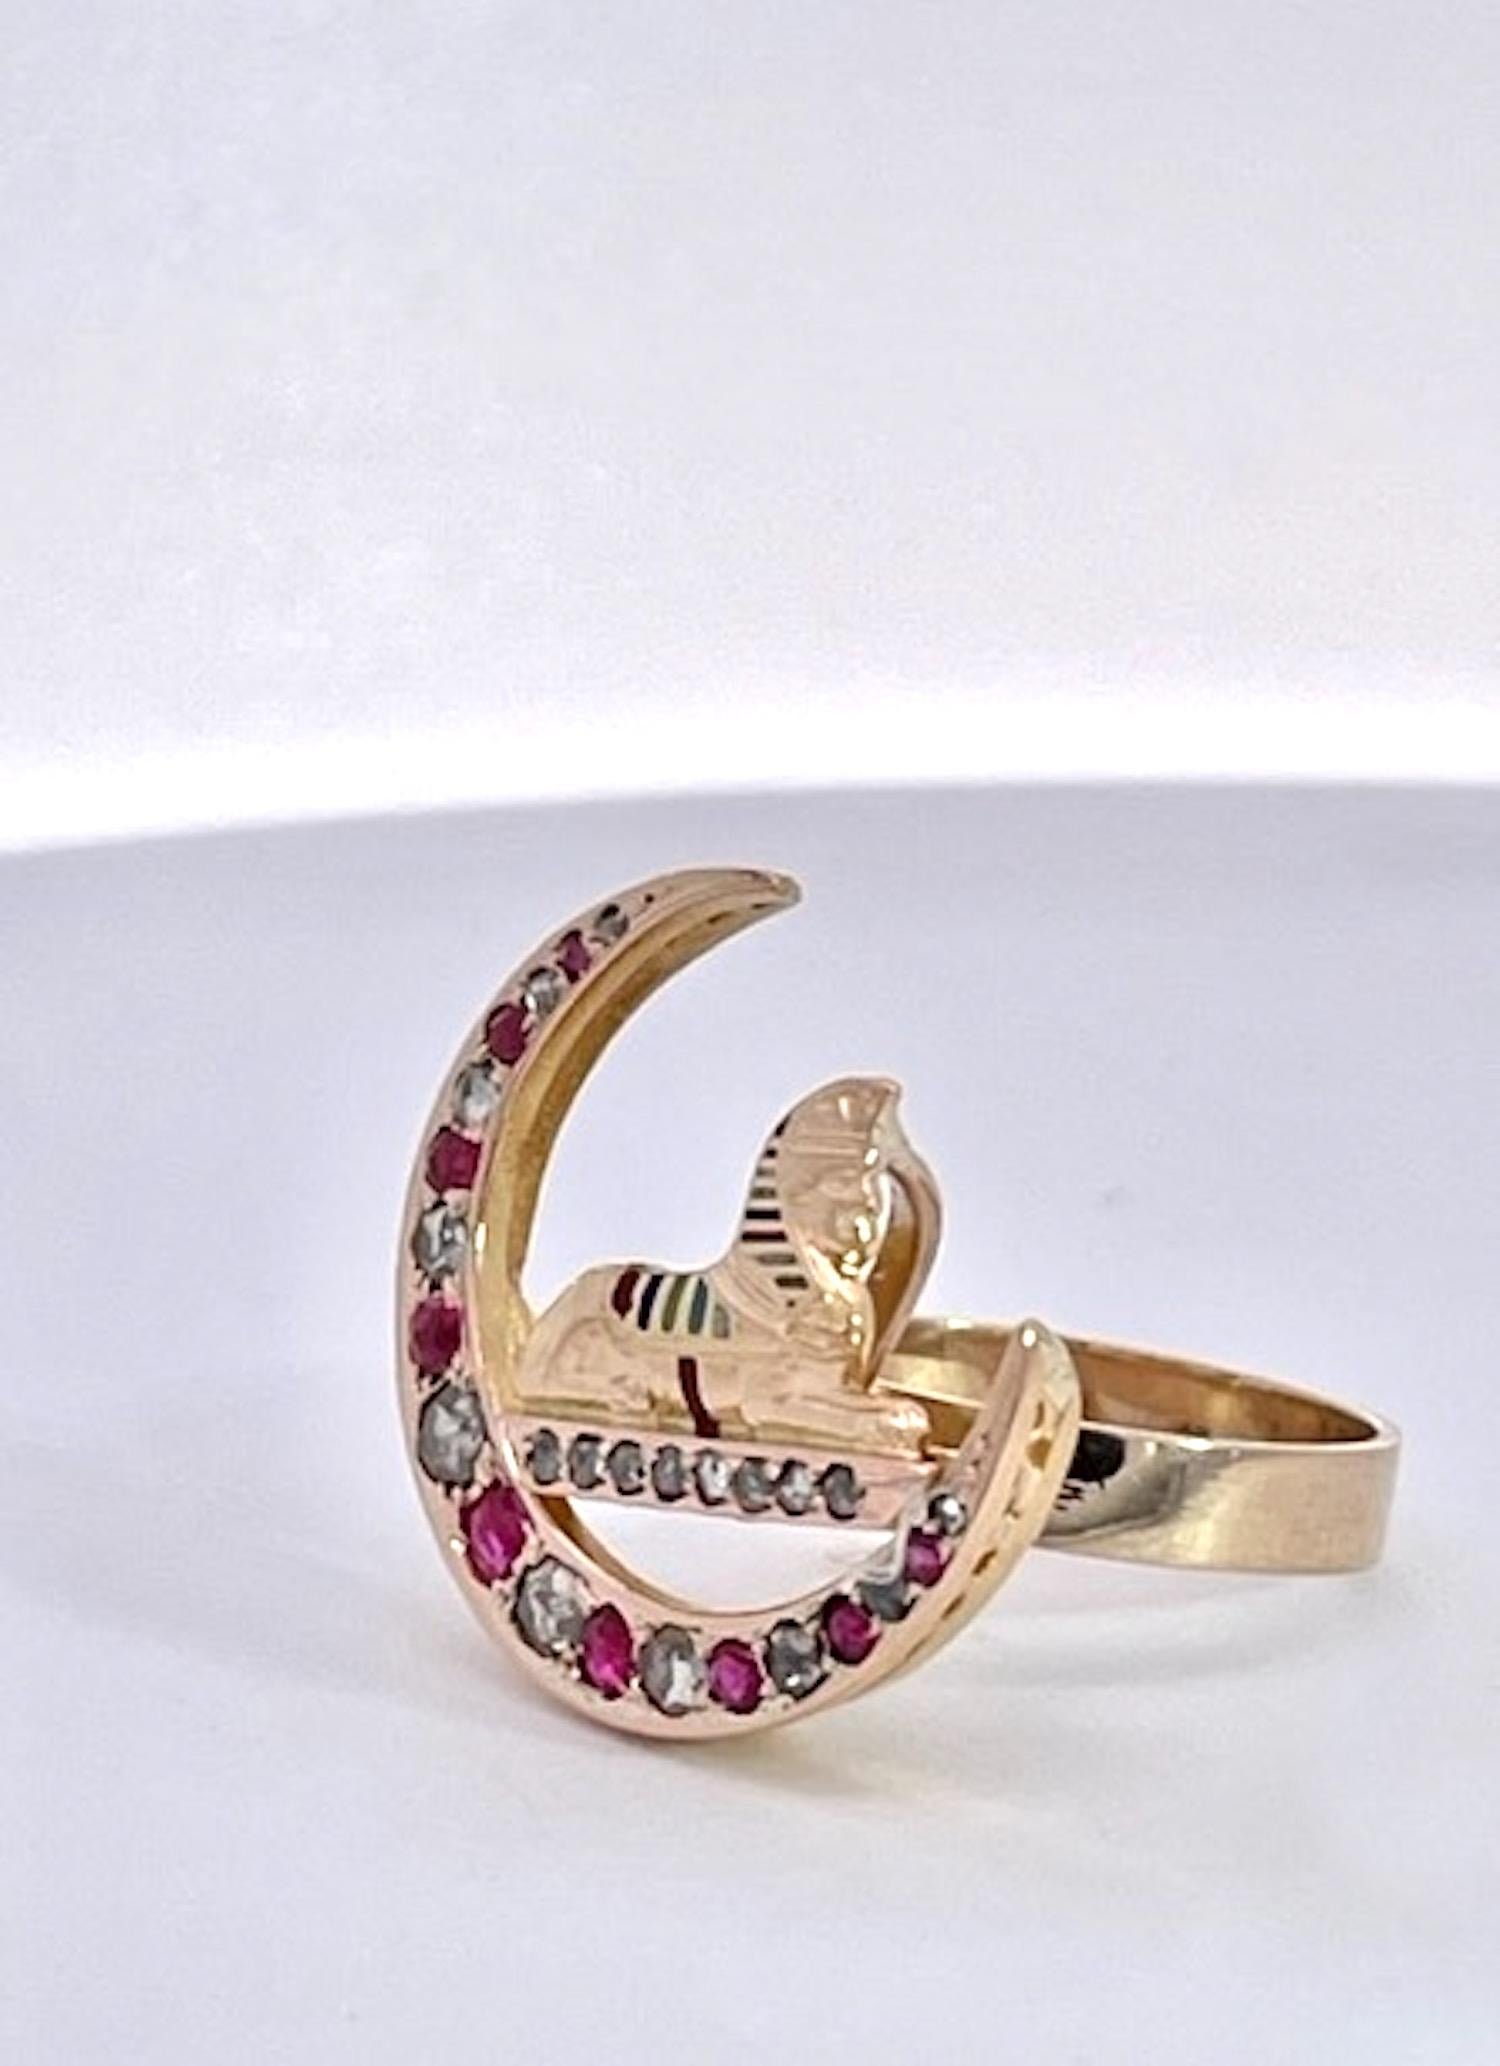 Antique Ruby Diamond Crescent Egyptian ring 5.75 In Good Condition For Sale In North Hollywood, CA